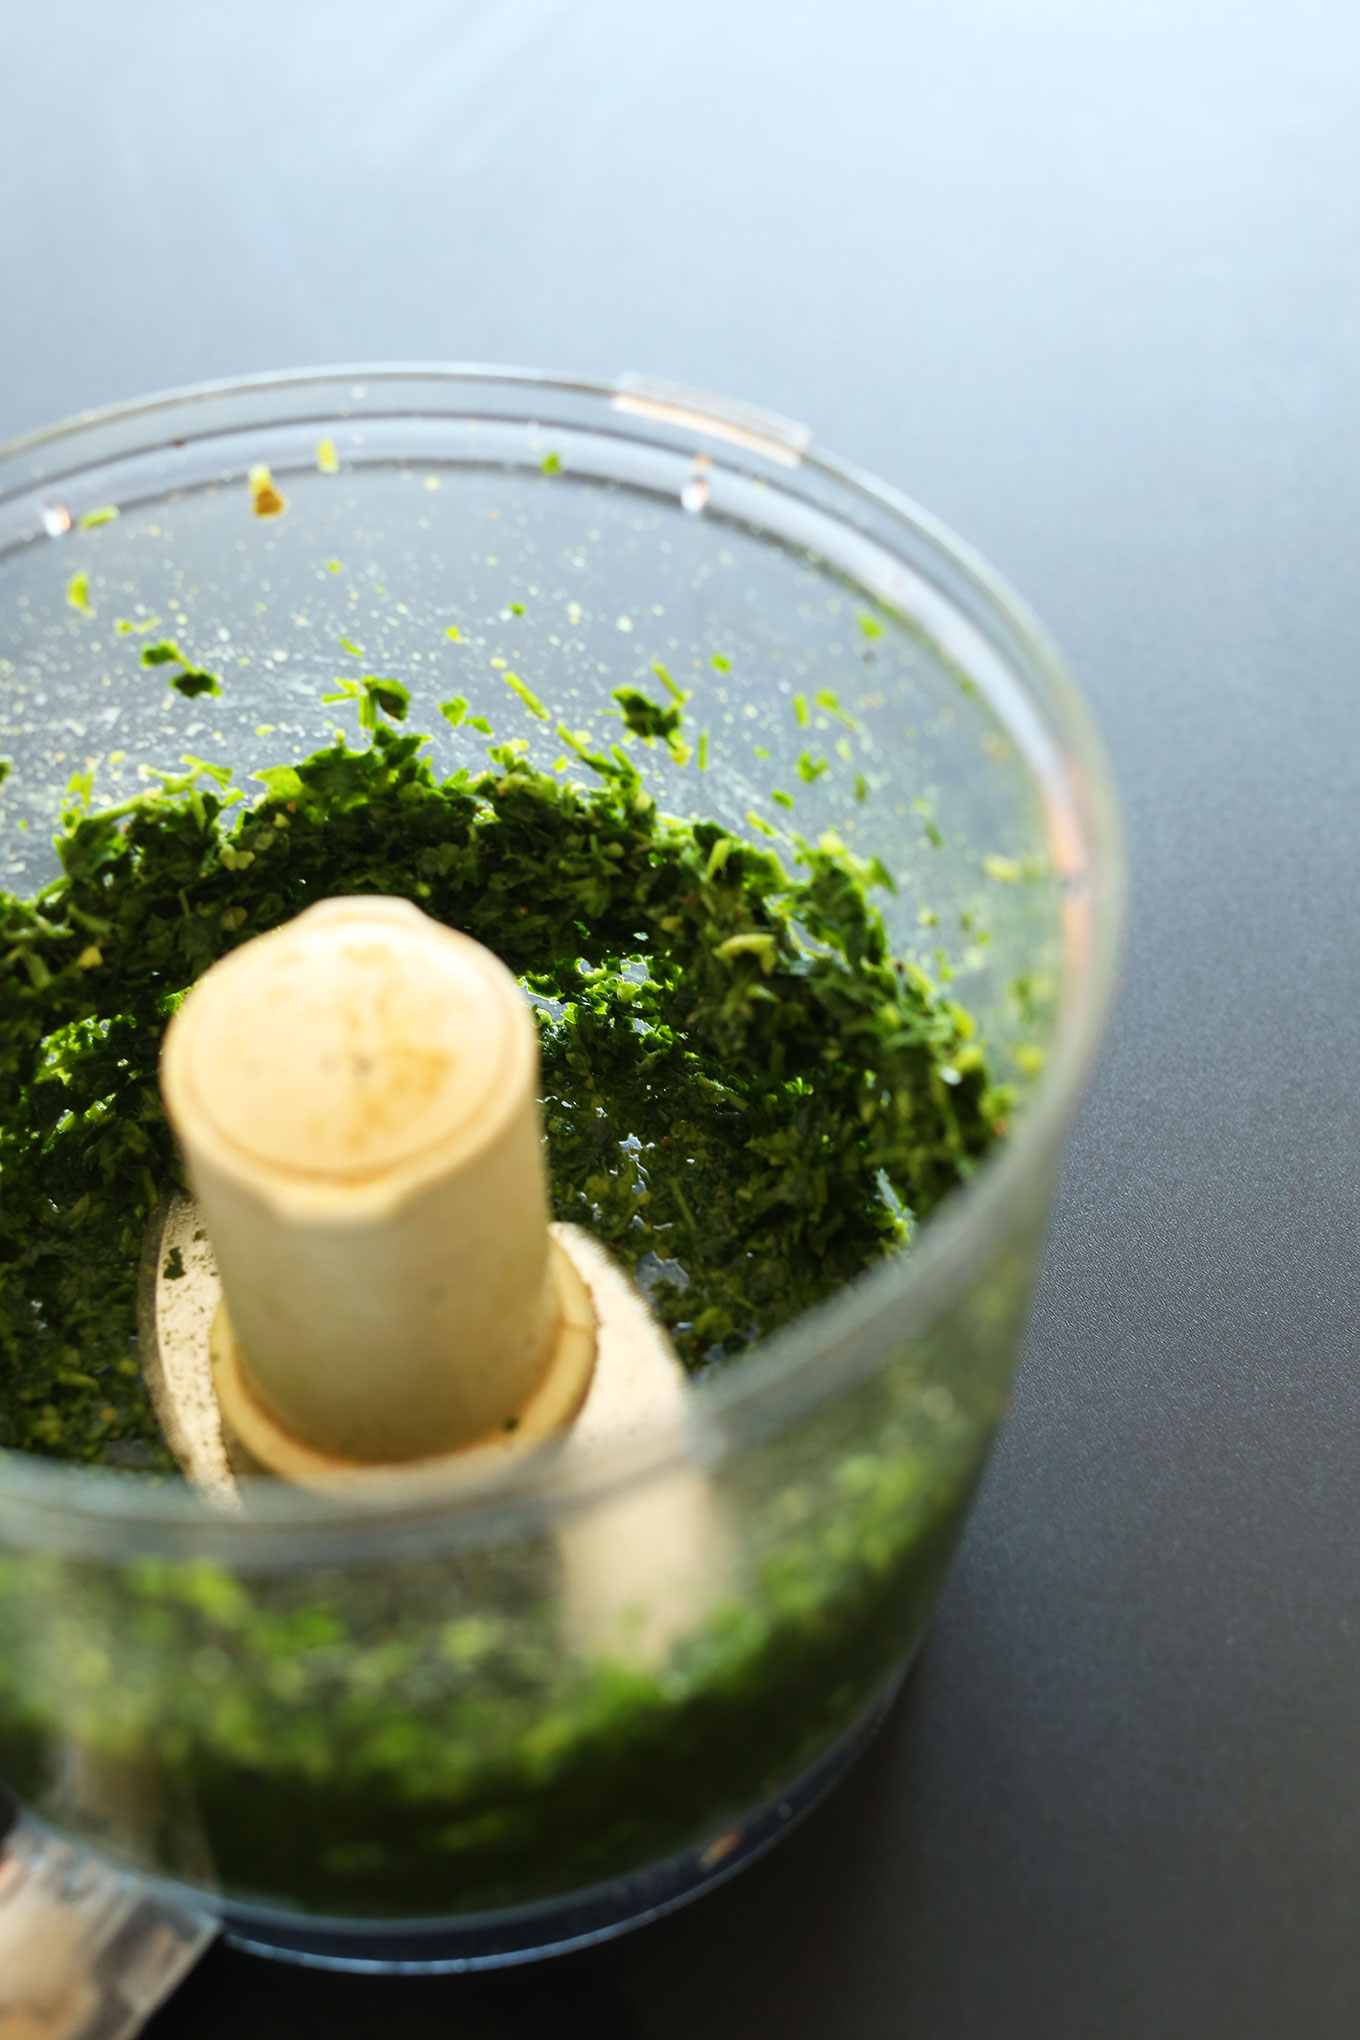 Pulsing green ingredients for falafel burgers in a food processor